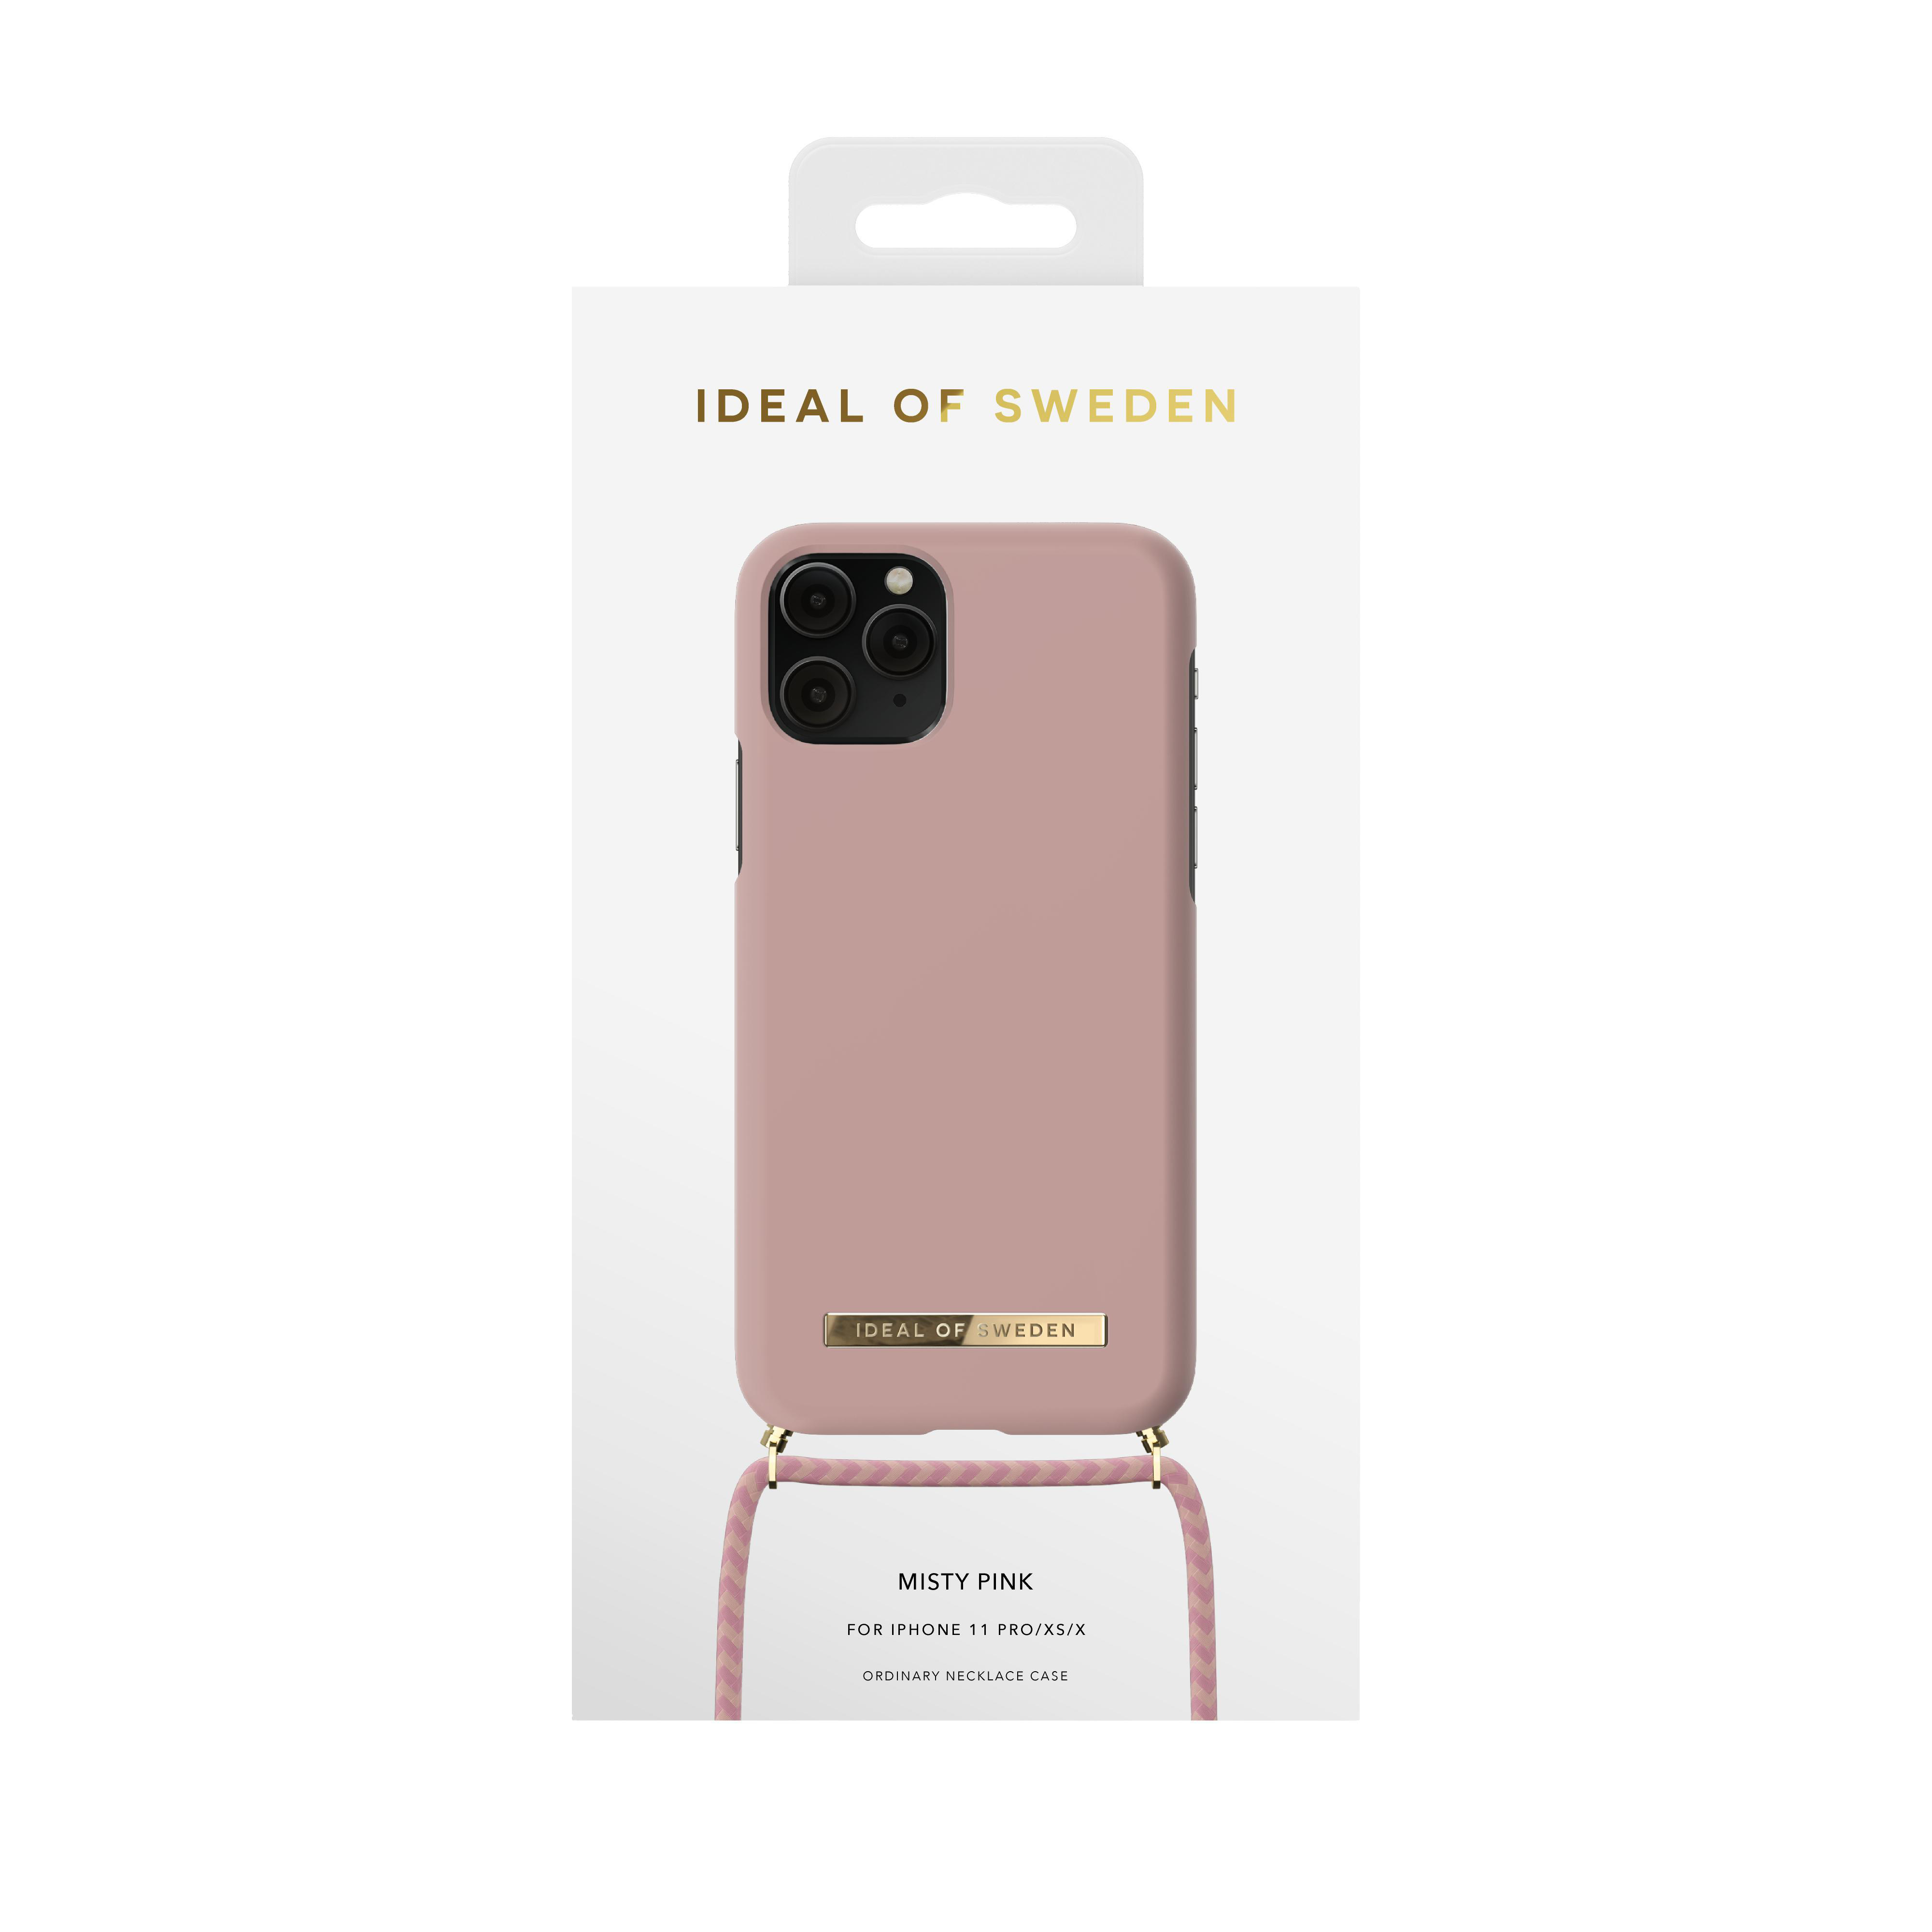 XS, OF Pink Pro, Backcover, IDEAL iPhone iPhone X, iPhone Apple, SWEDEN 11 Necklace,